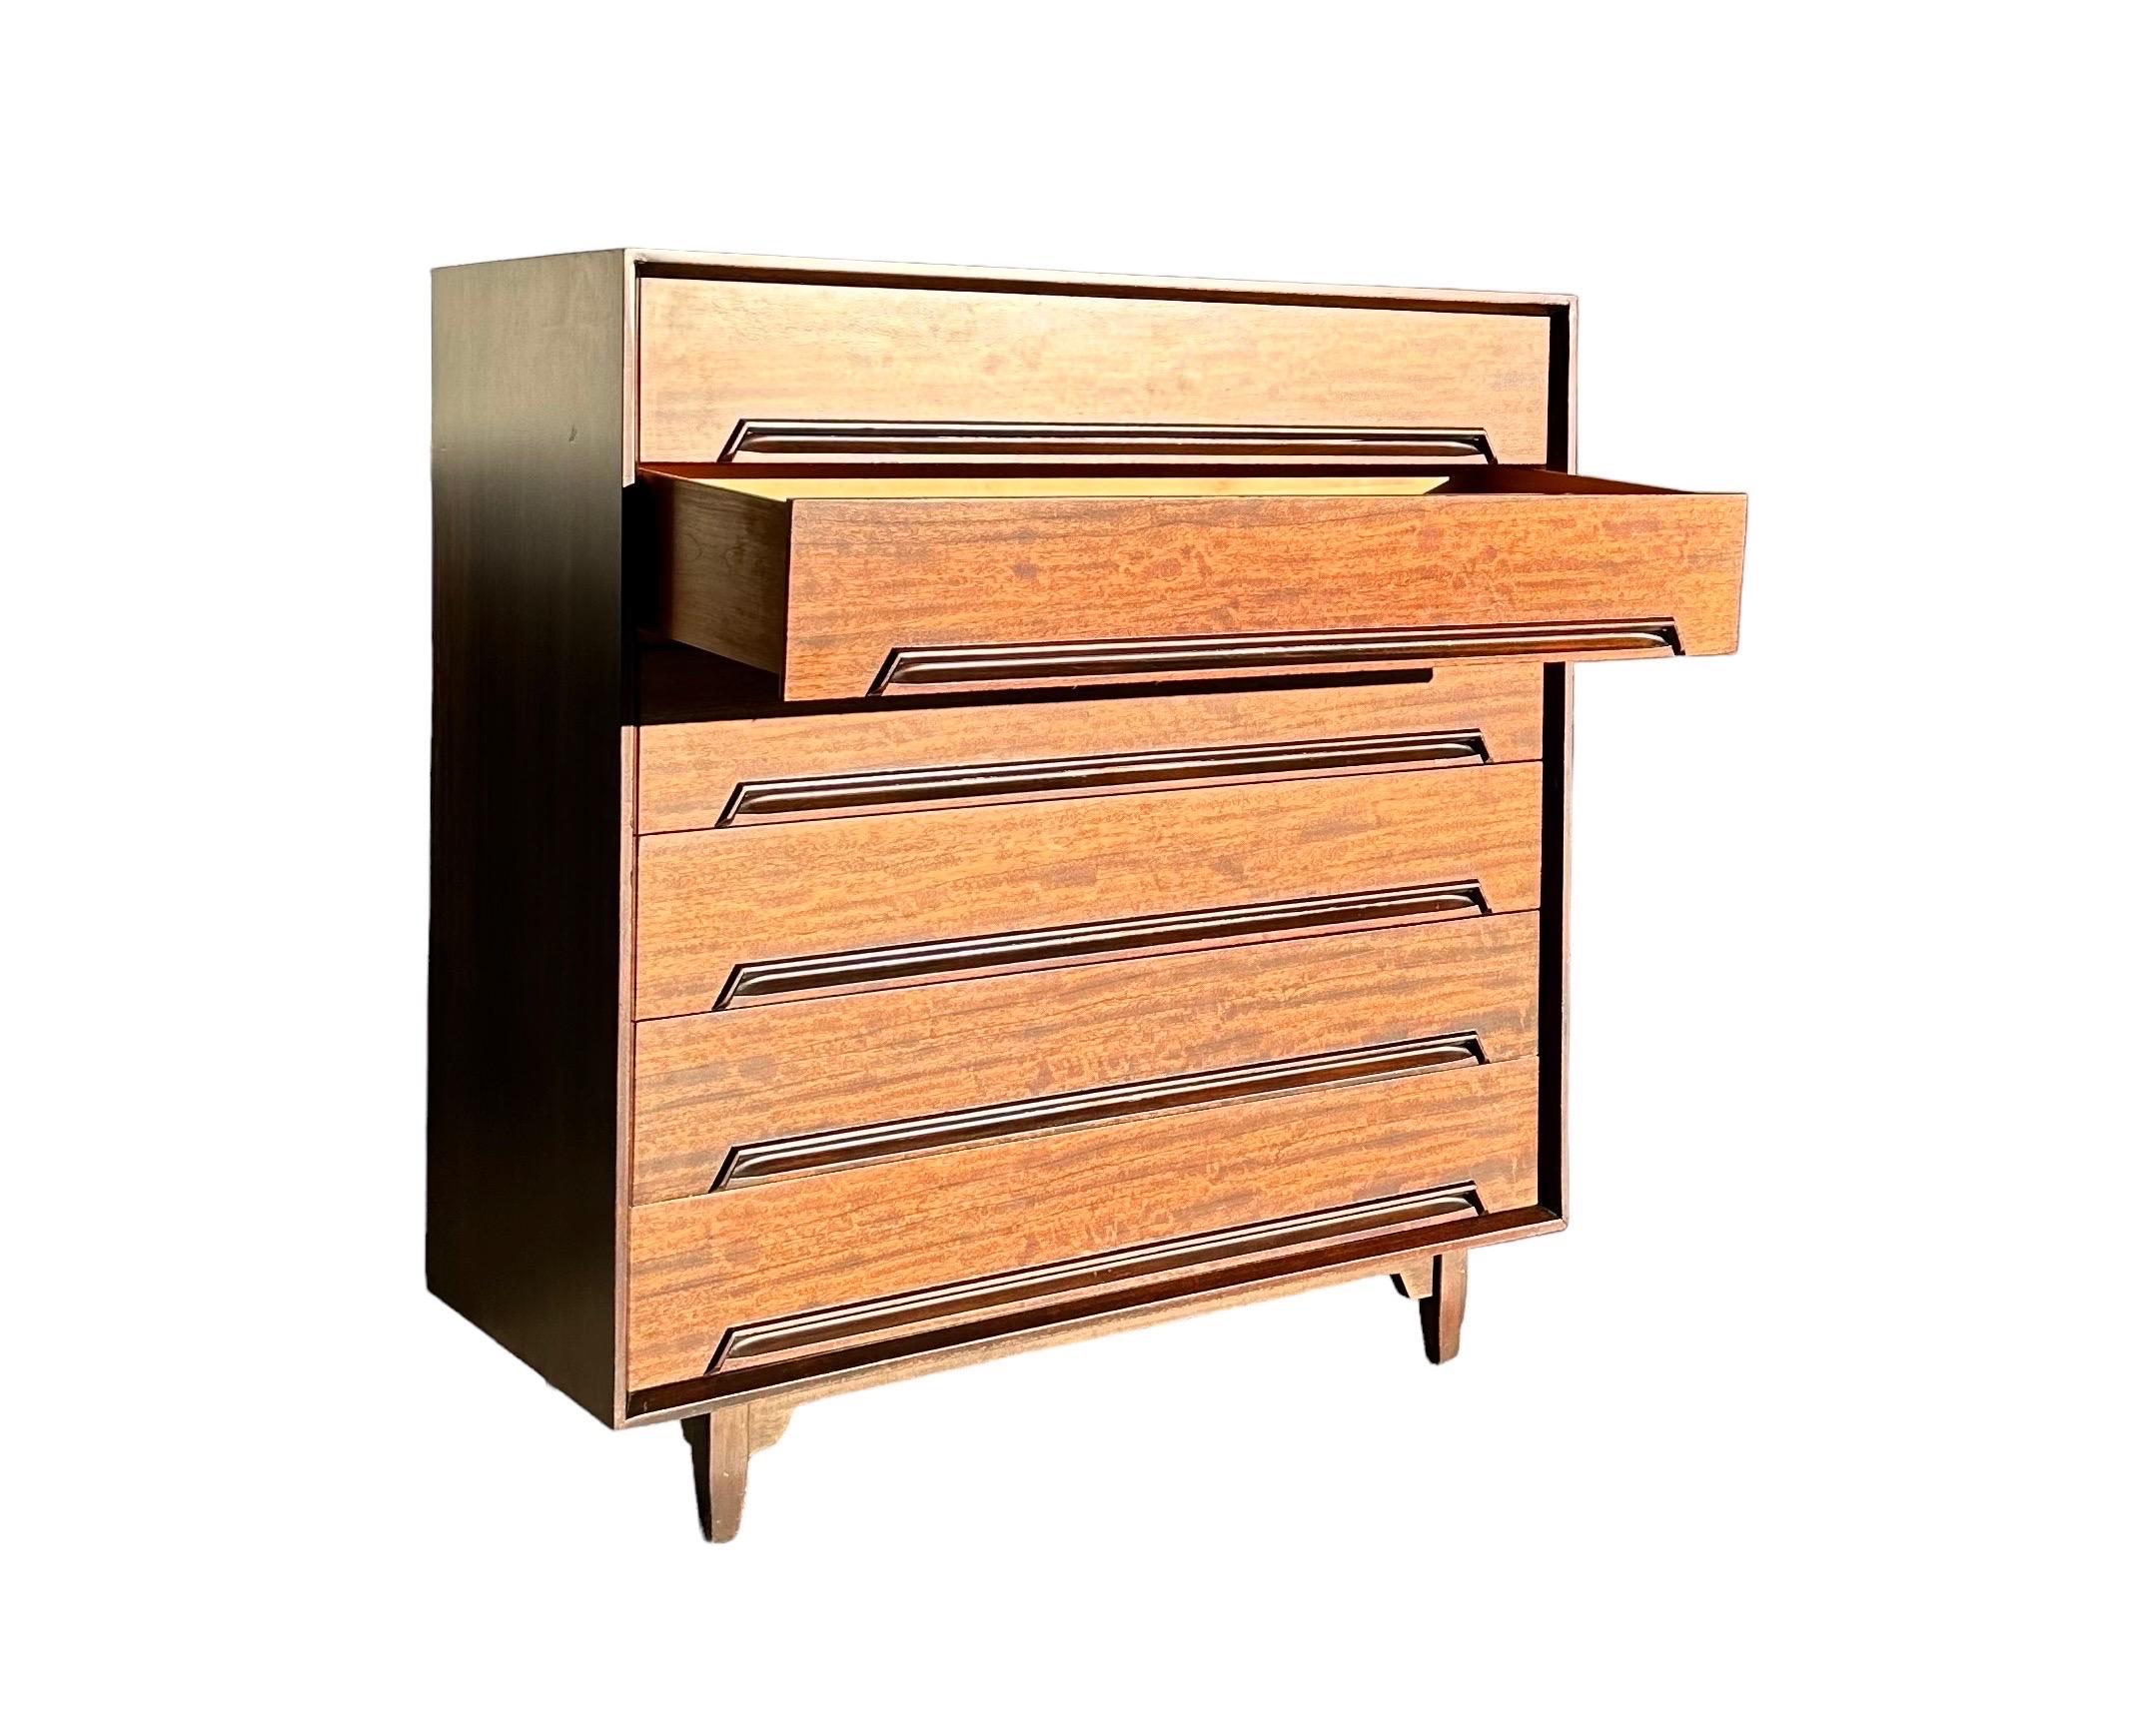 Stunning mid century modern “Perspective” walnut dresser designed by Milo Baughman for Drexel furniture. This dresser is equipped with 6 wide and deep drawers that function very smoothly. Each drawer has long sculpture drawer pulls. In good